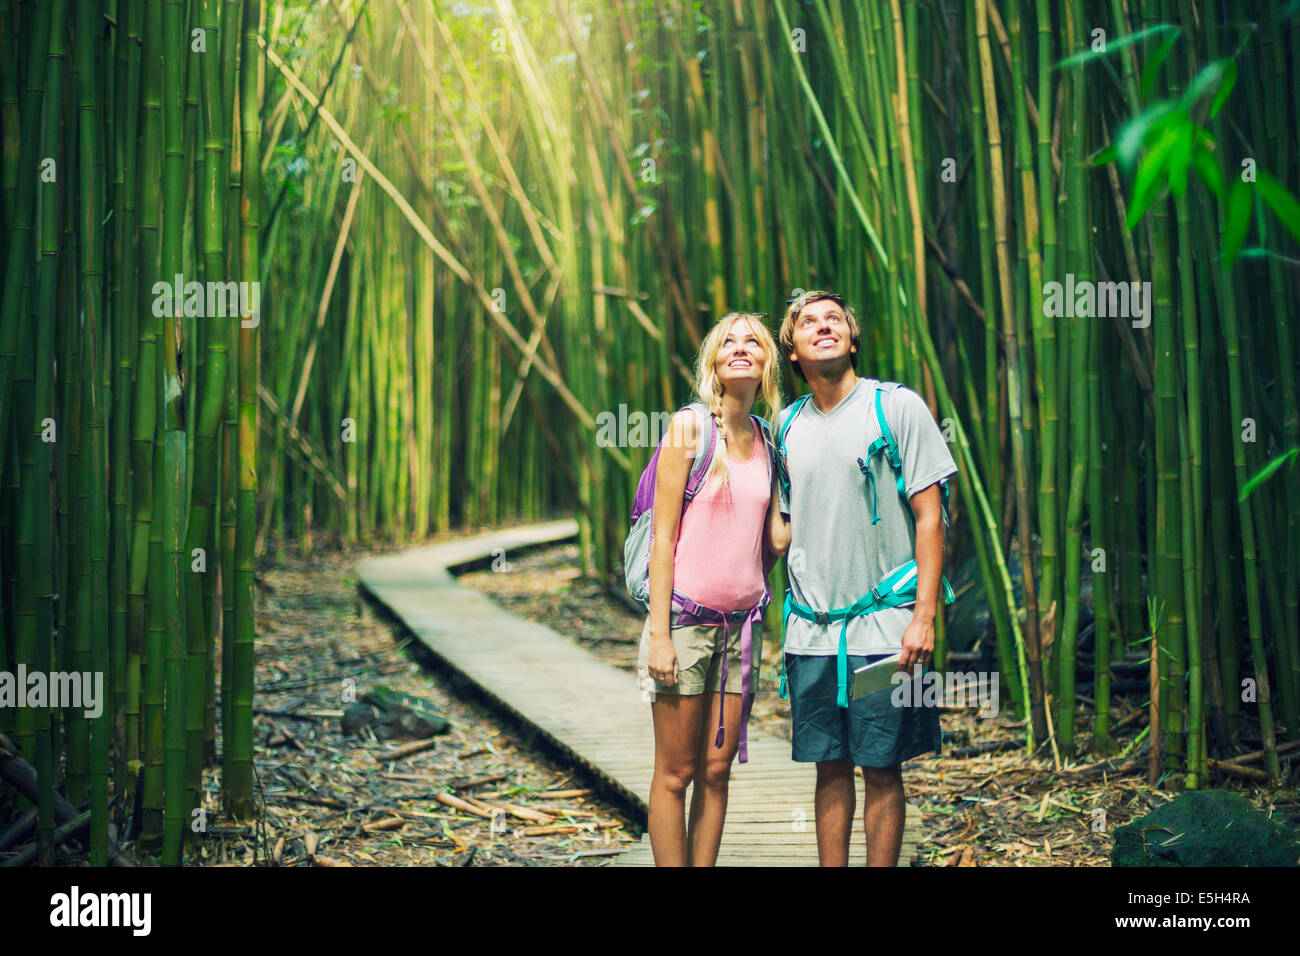 Couple having fun together outdoors on hike through amazing bamboo forest trail. Stock Photo